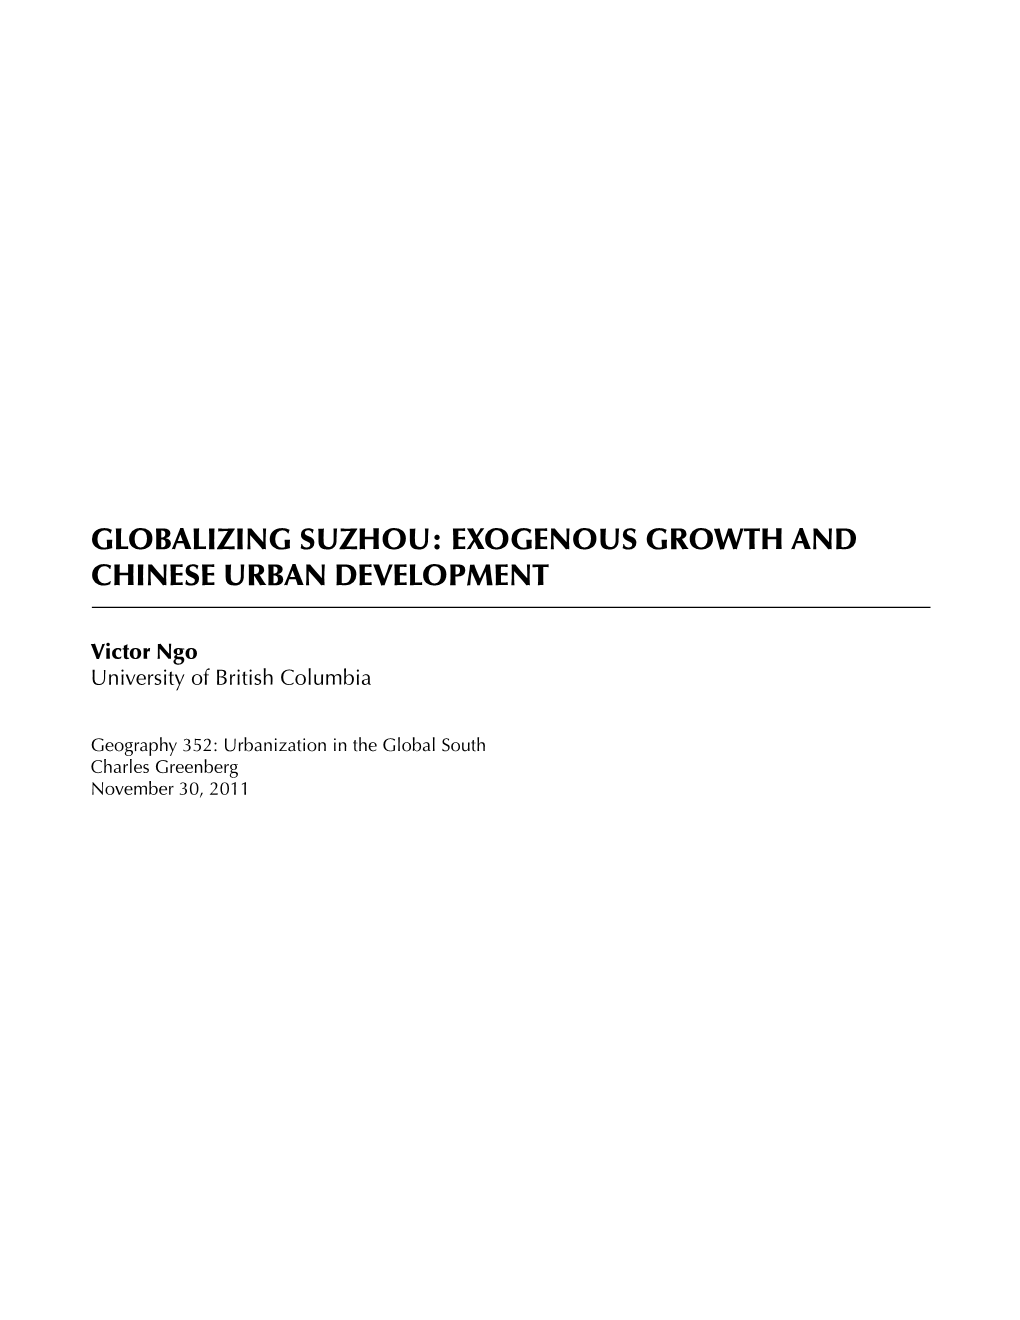 Globalizing Suzhou: Exogenous Growth and Chinese Urban Development